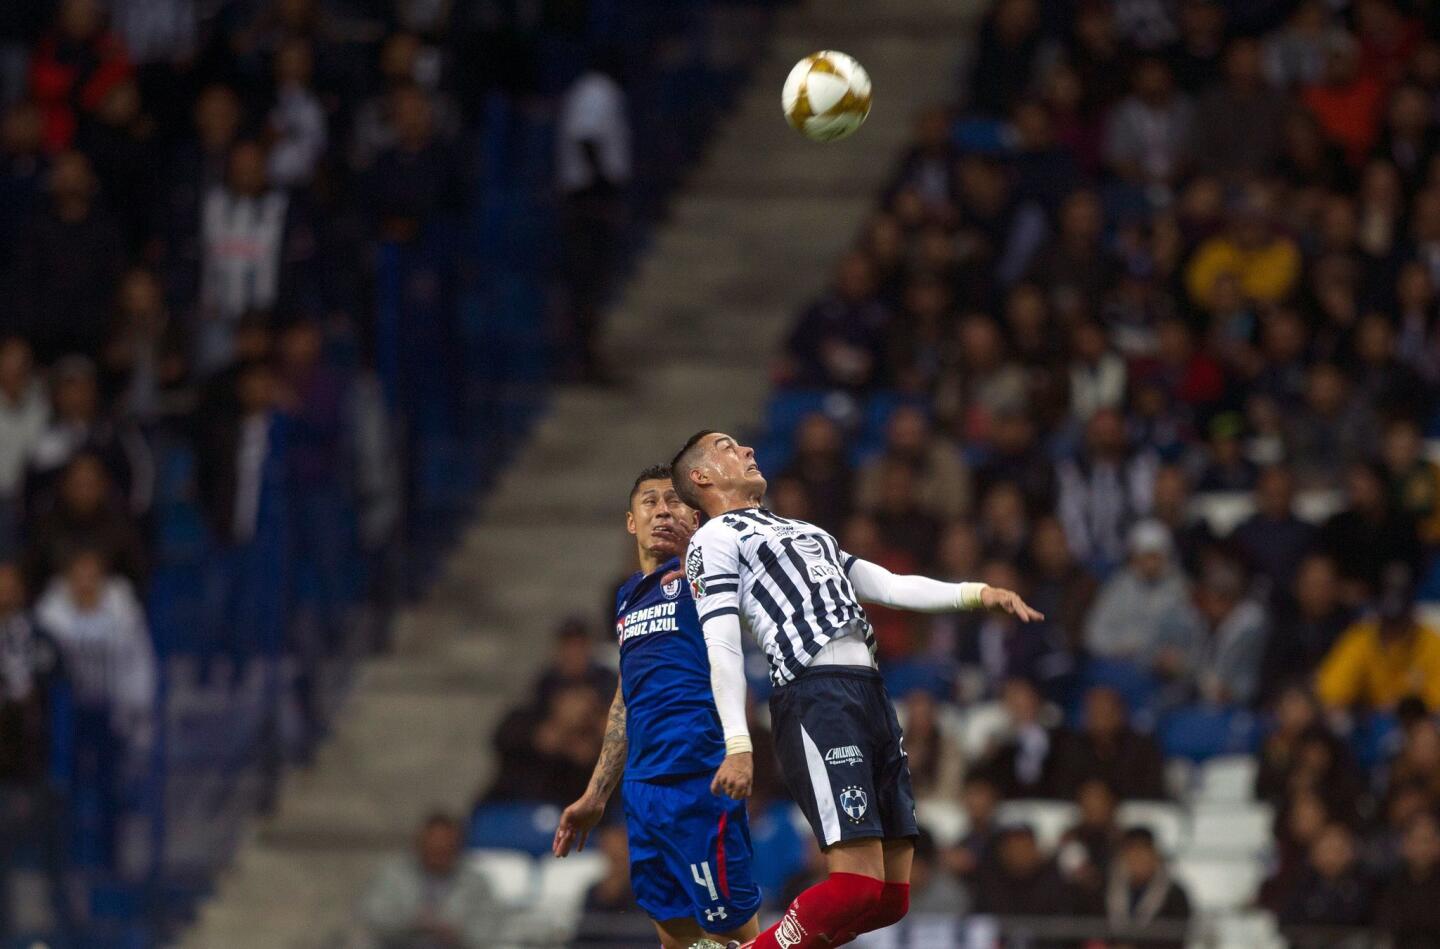 Monterrey's Argentinian foward Rogelio Funes Mori (R) jumps for a header with Cruz Azul's Mexican defender Julio Dominguez (L) during the first leg of the semifinal of the Mexican Apertura 2018 tournament football, match at the BBVA Bancomer stadium in Monterrey, Mexico on December 5, 2018. (Photo by Julio Cesar AGUILAR / AFP)JULIO CESAR AGUILAR/AFP/Getty Images ** OUTS - ELSENT, FPG, CM - OUTS * NM, PH, VA if sourced by CT, LA or MoD **